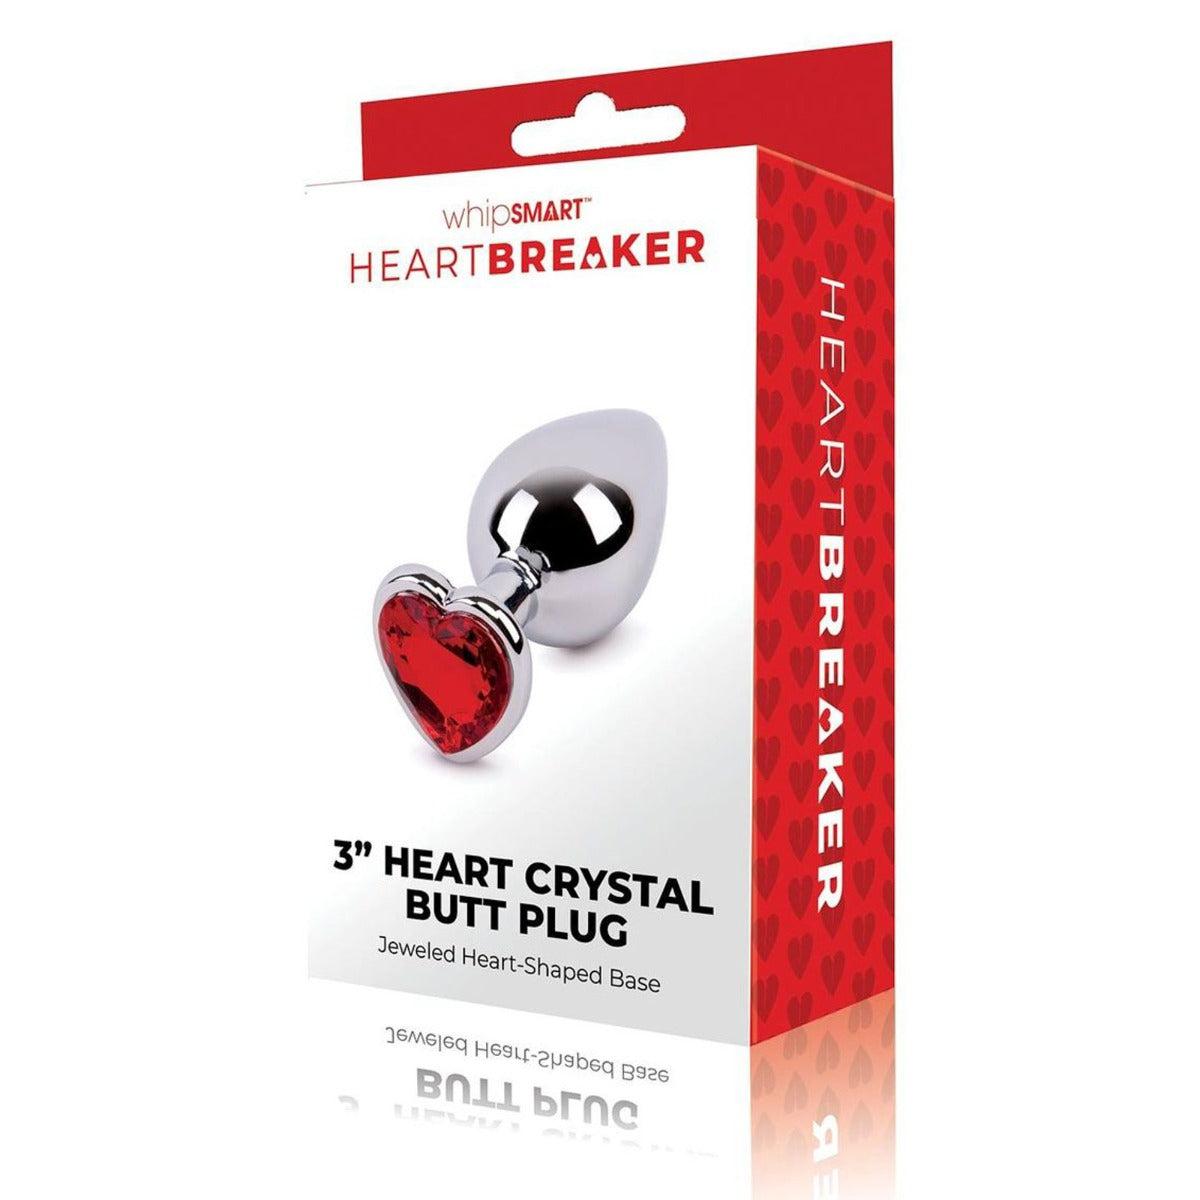 WhipSMART | HEARTBREAKER METAL BUTT PLUG - 3 Inches